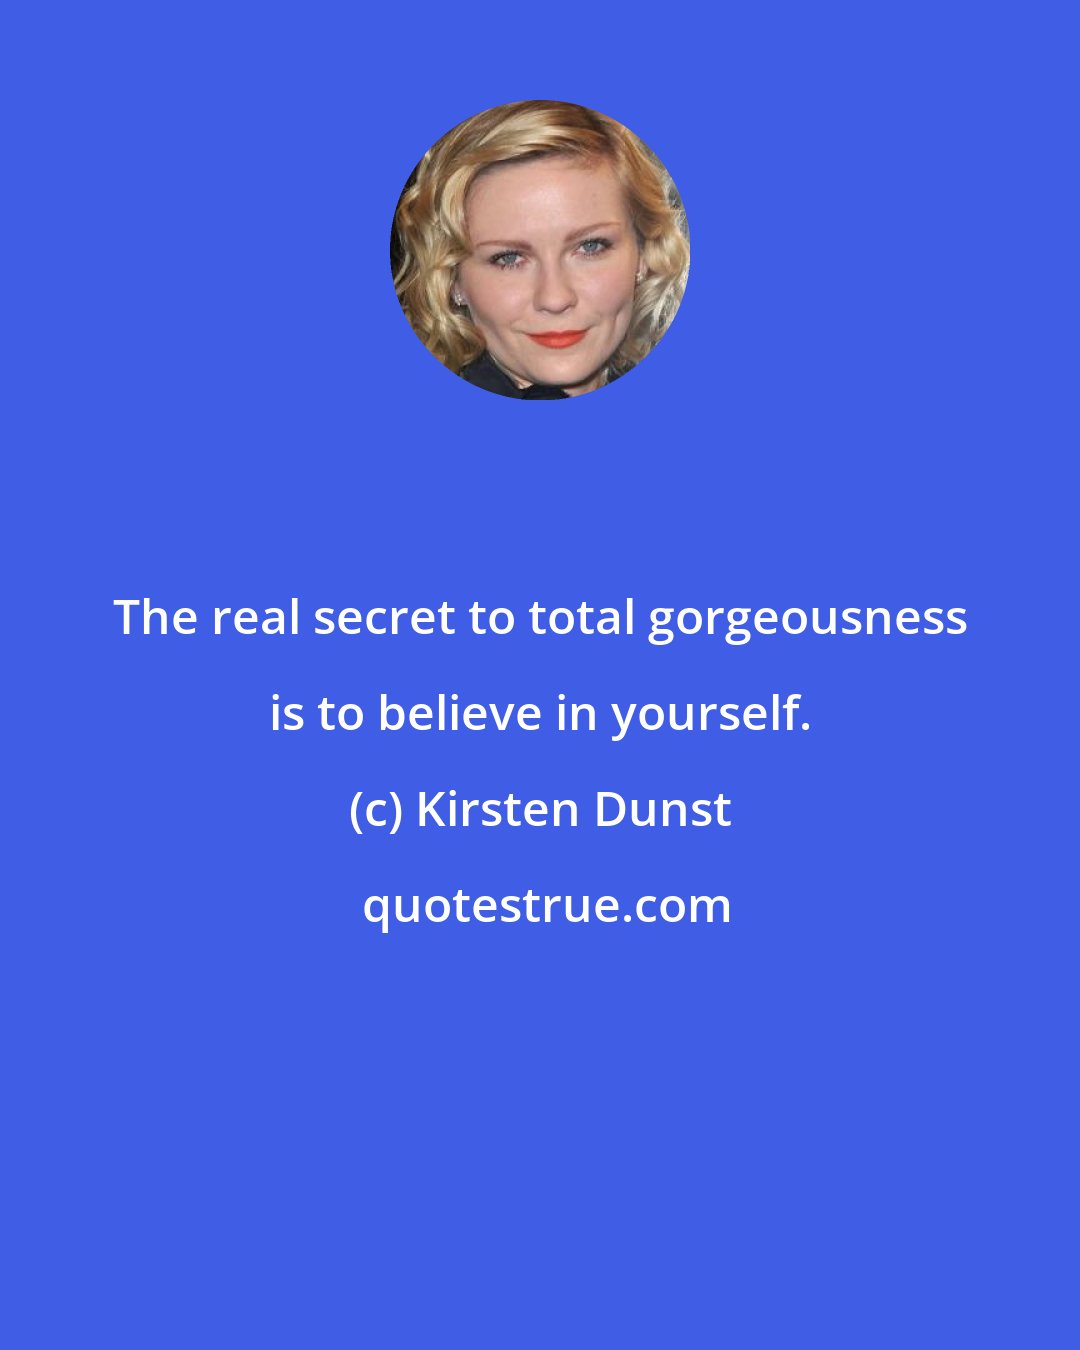 Kirsten Dunst: The real secret to total gorgeousness is to believe in yourself.